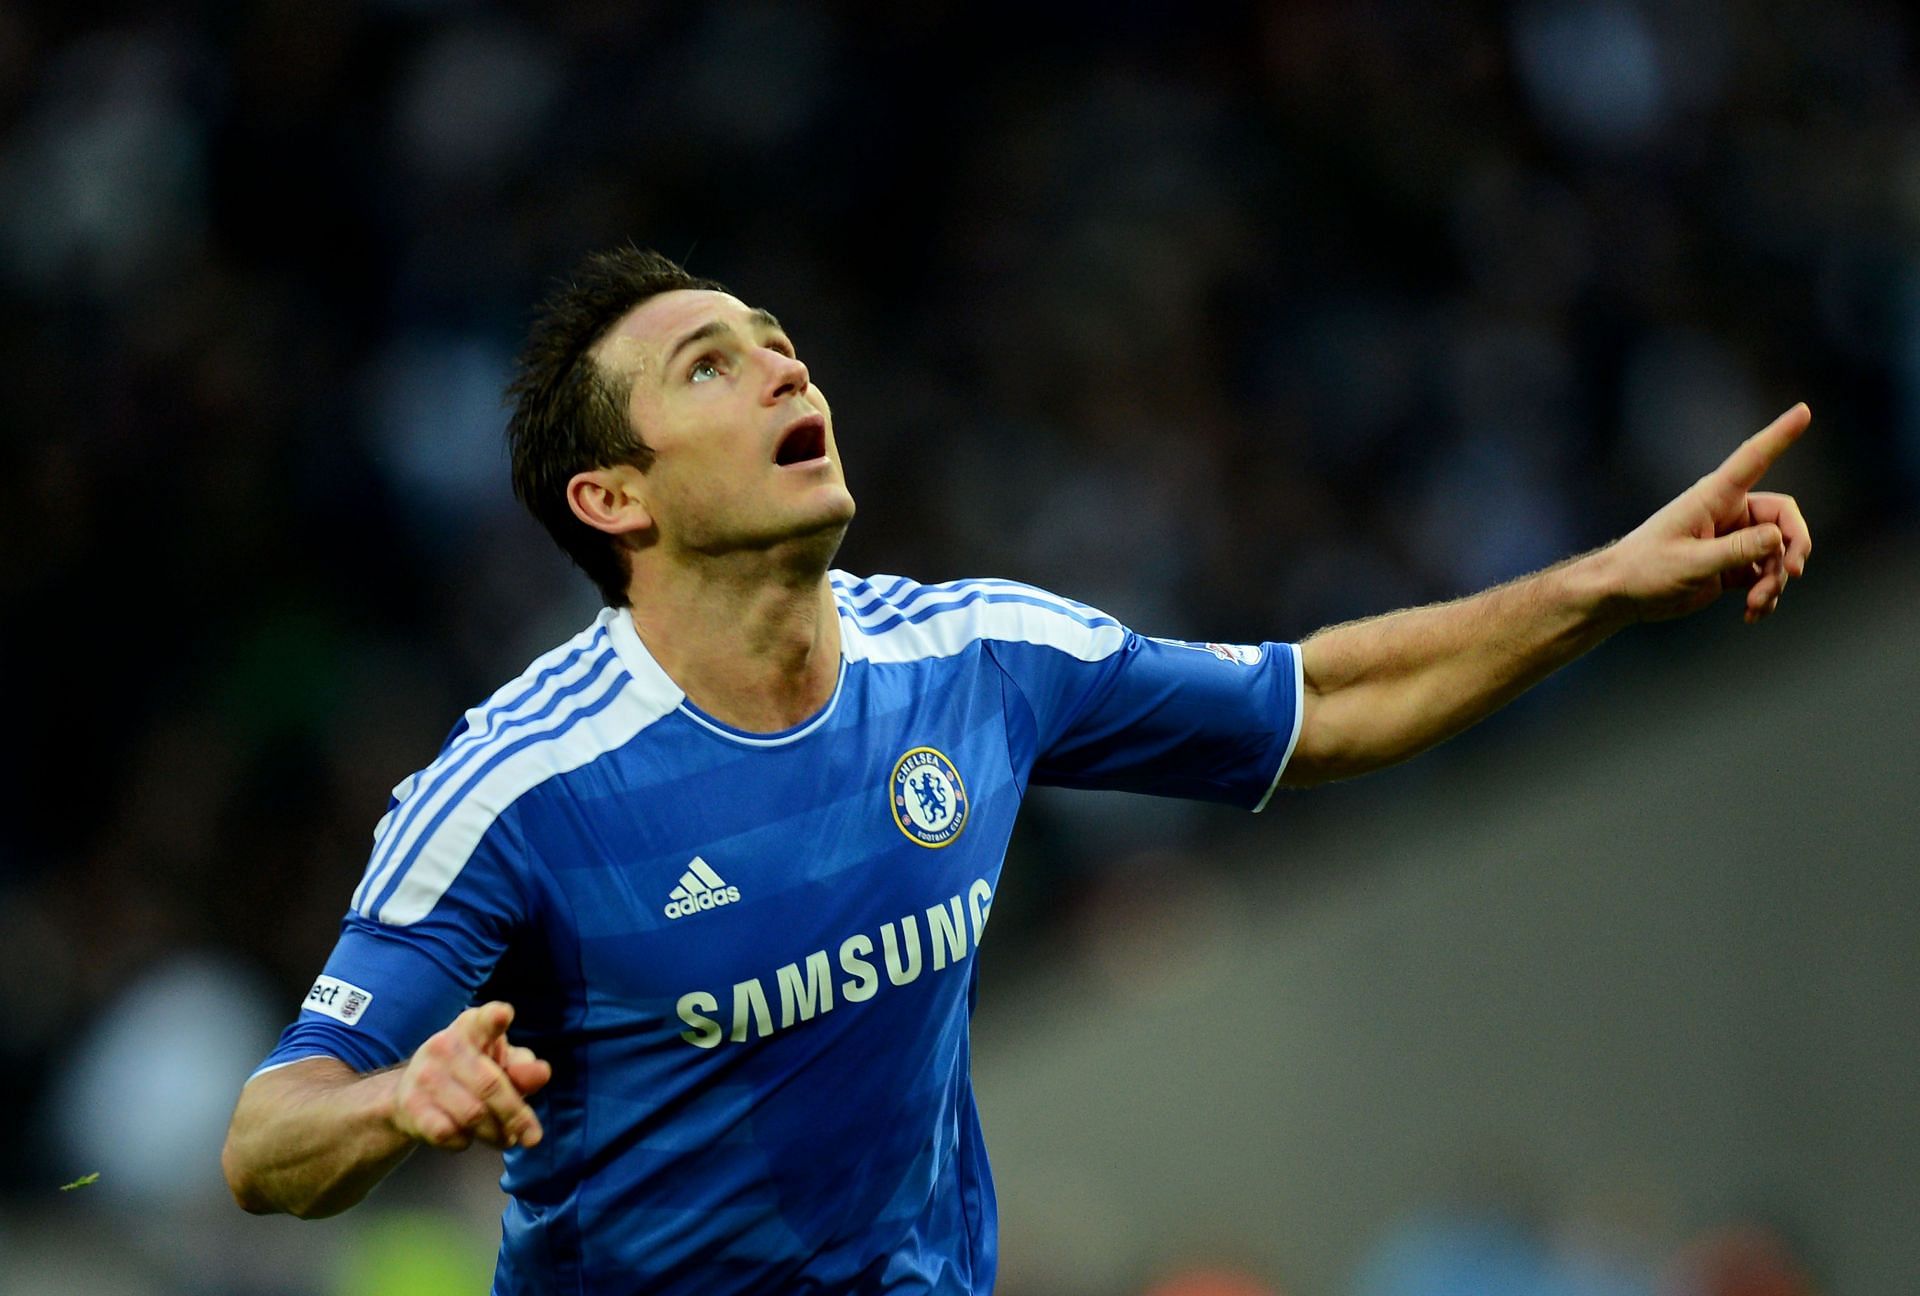 Frank Lampard celebrates a goal for Chelsea.